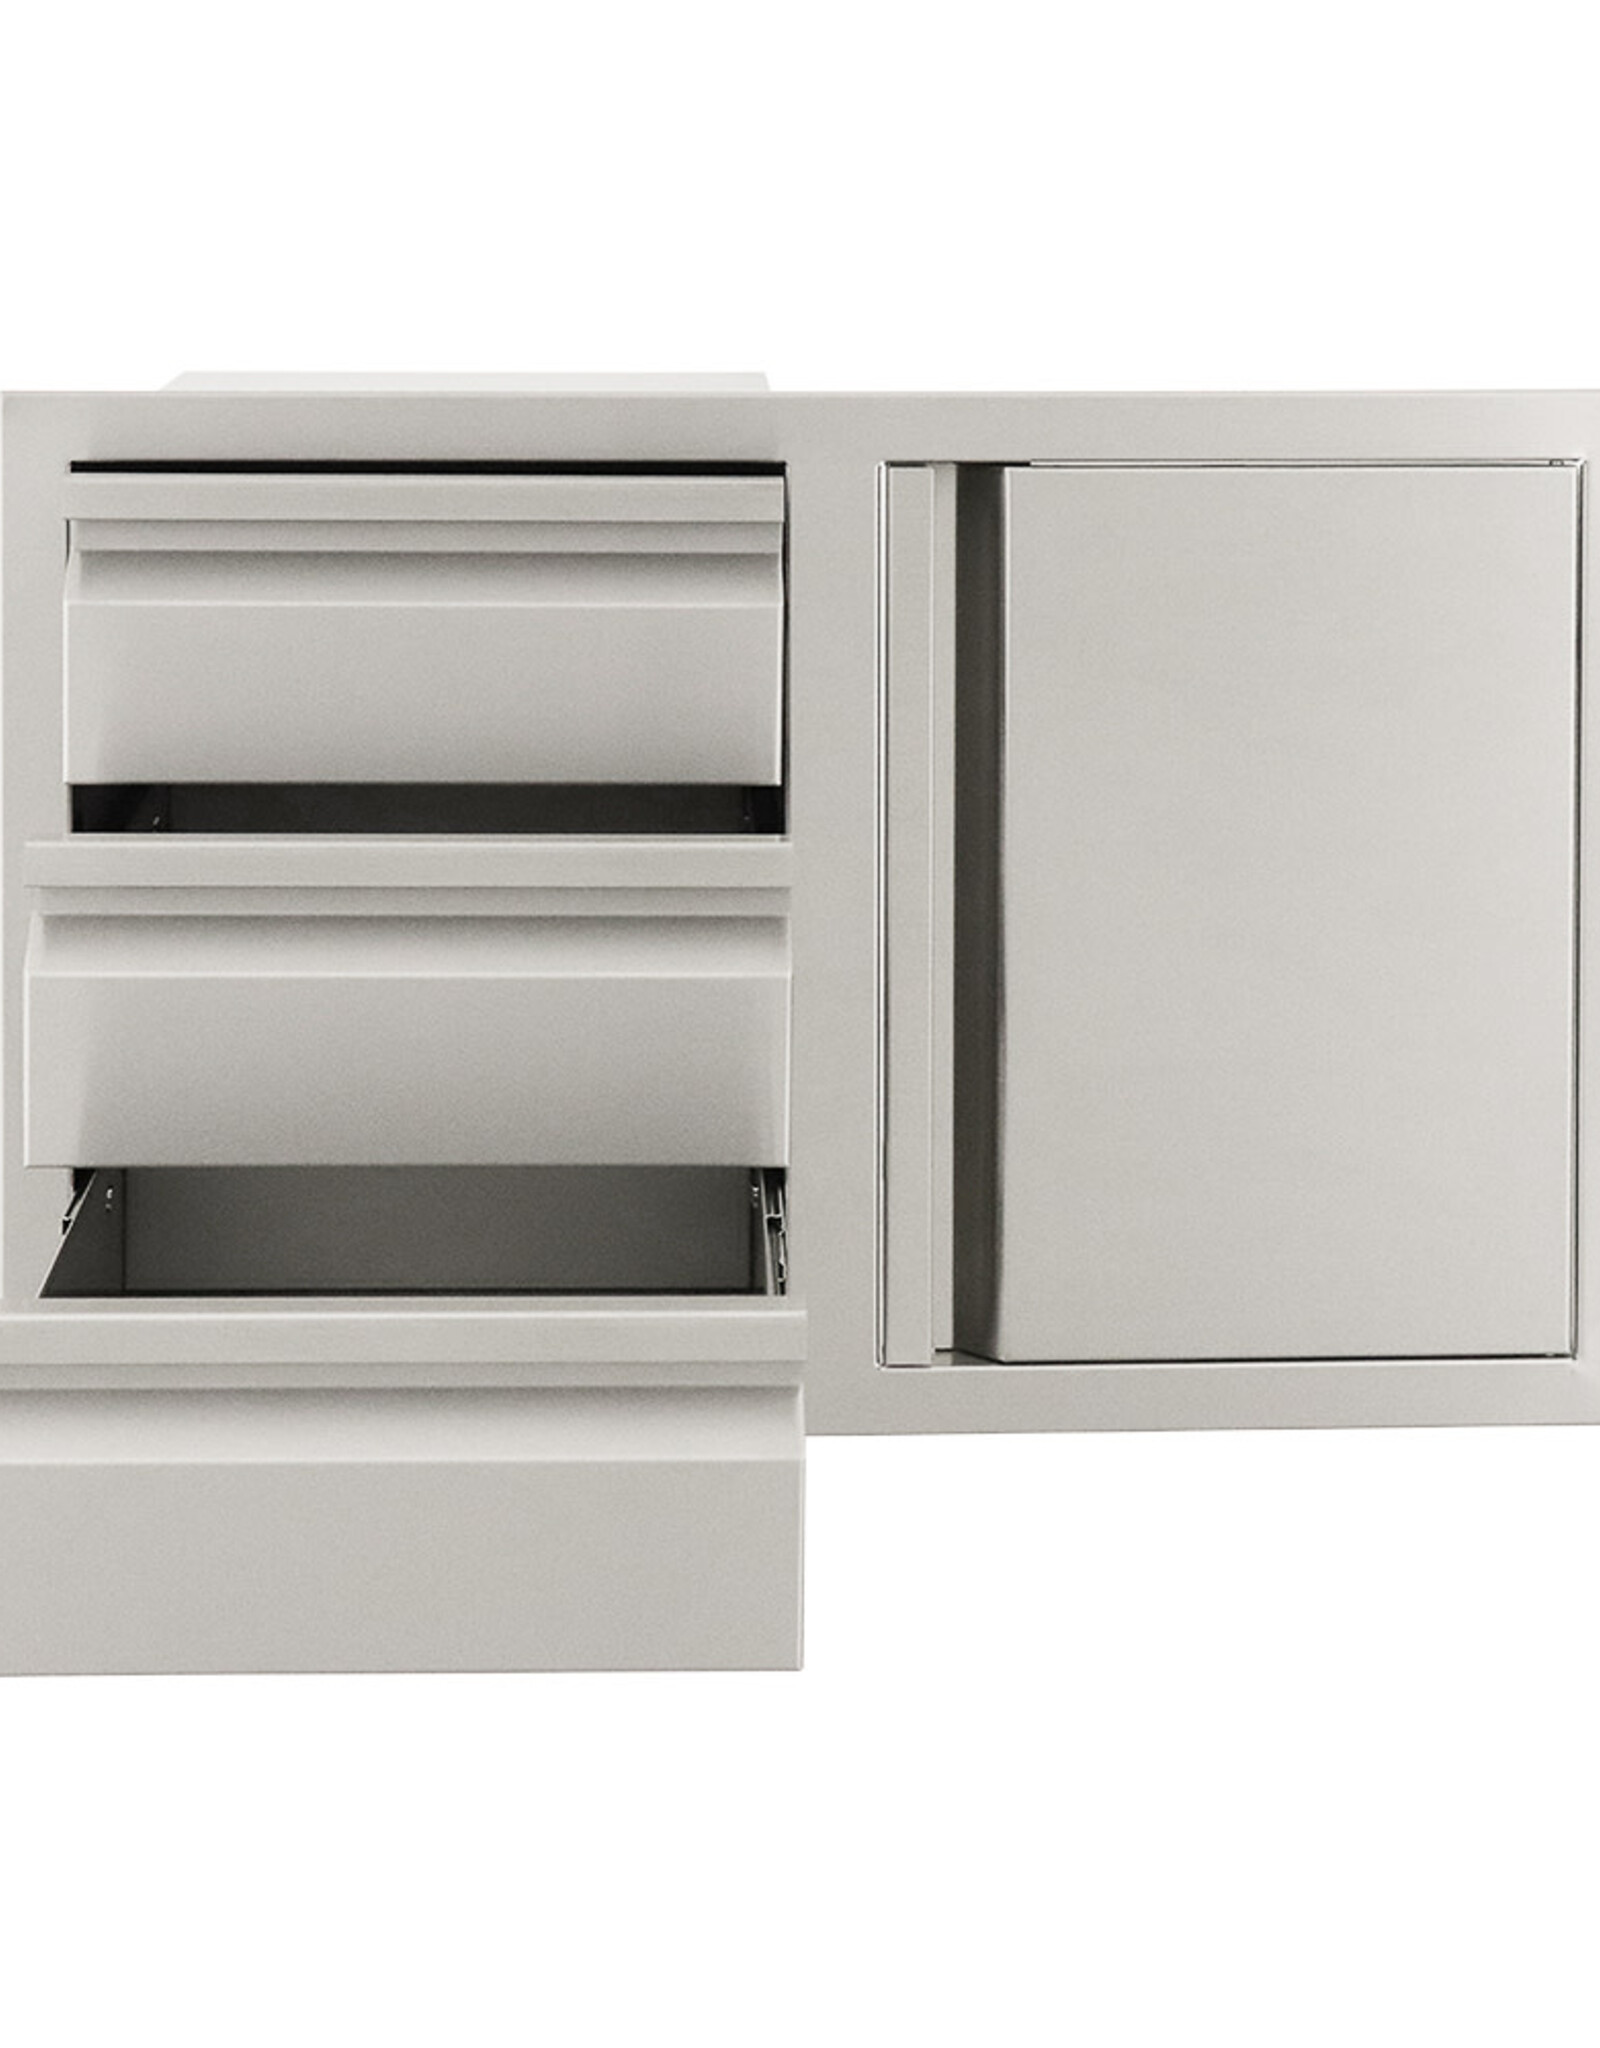 Renaissance Cooking Systems Renaissance Cooking Systems Triple Drawer / Door Combo - VDC2